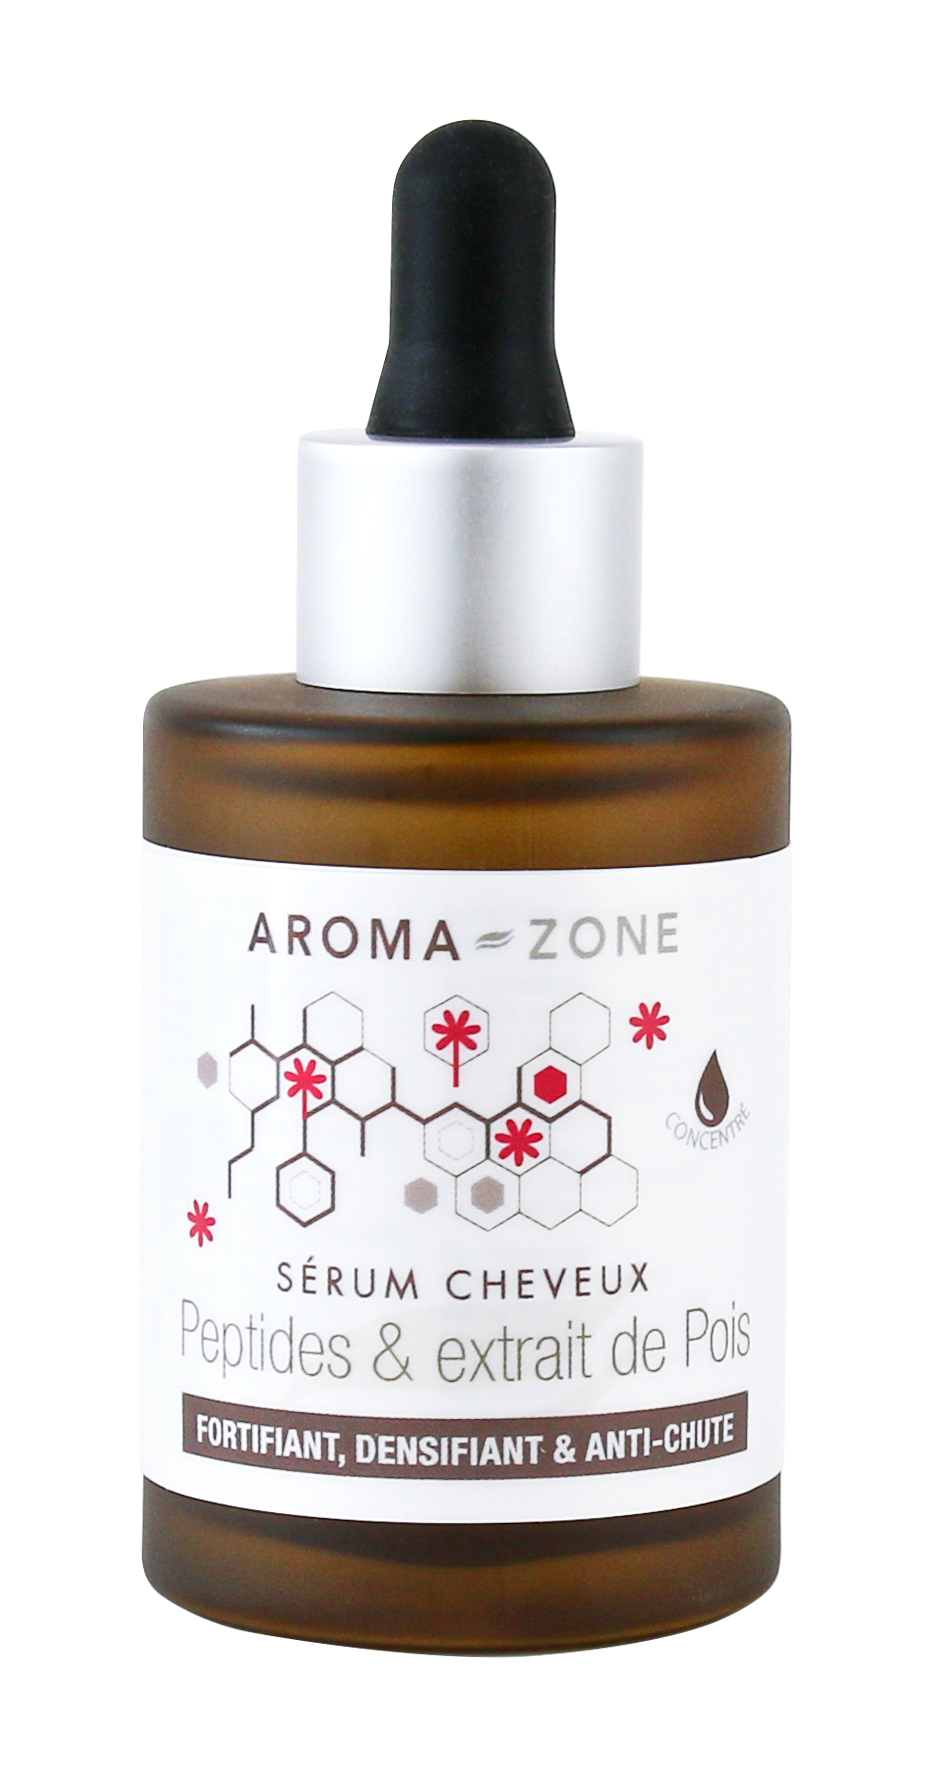 La routine In and Out pousse de cheveux Aroma-Zone